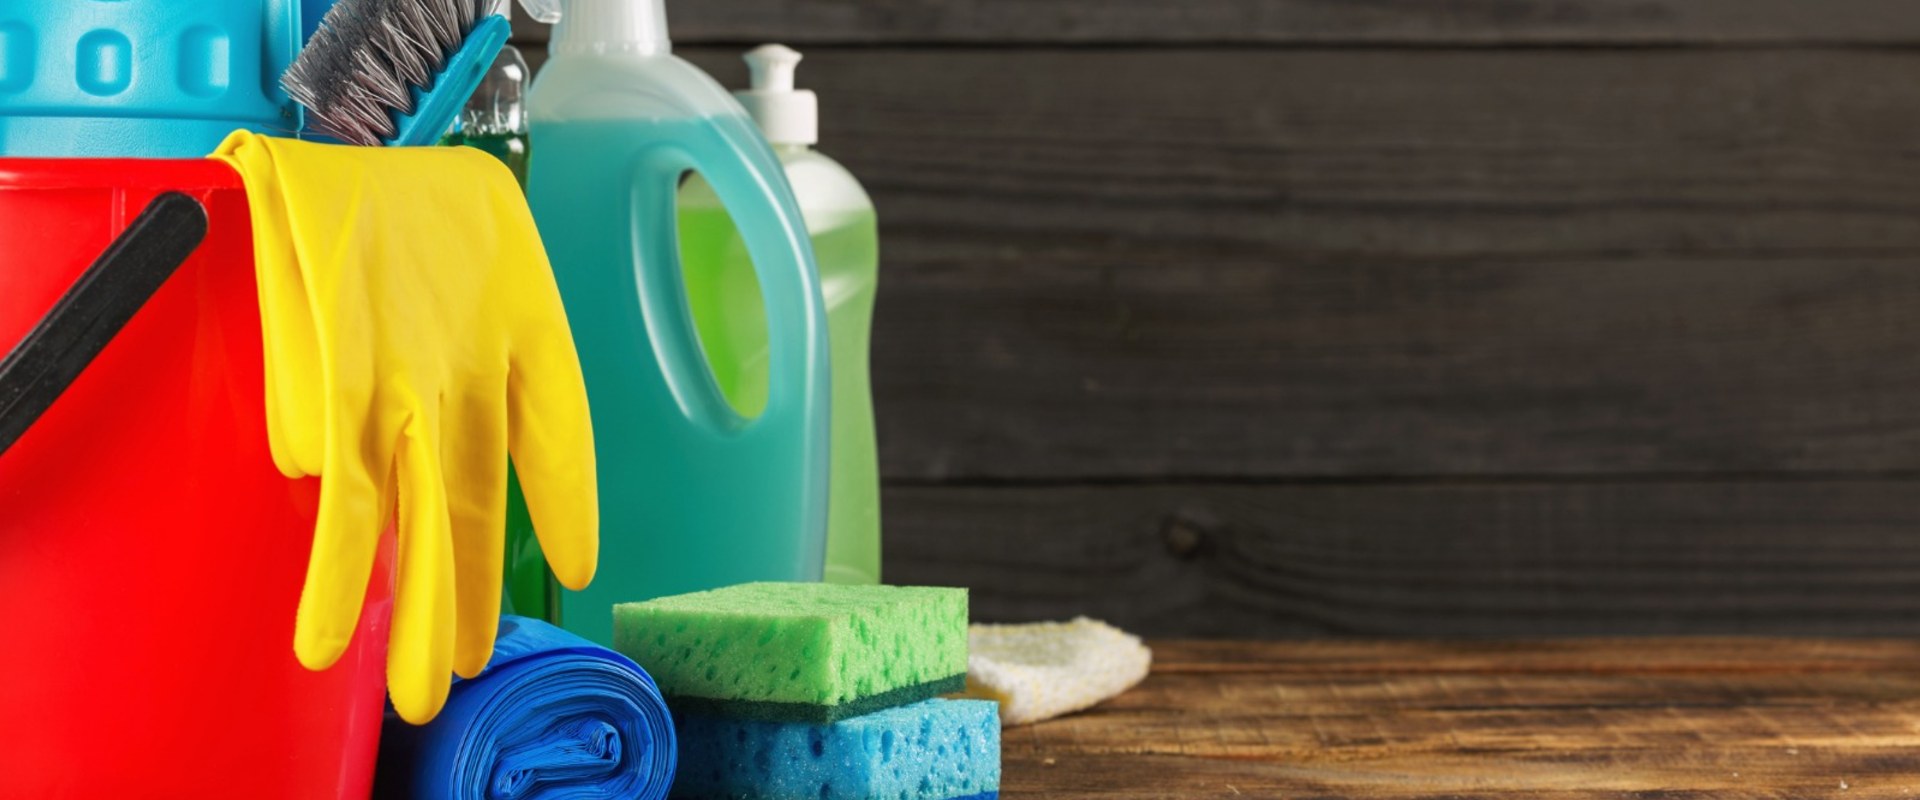 How to make commercial cleaning products?